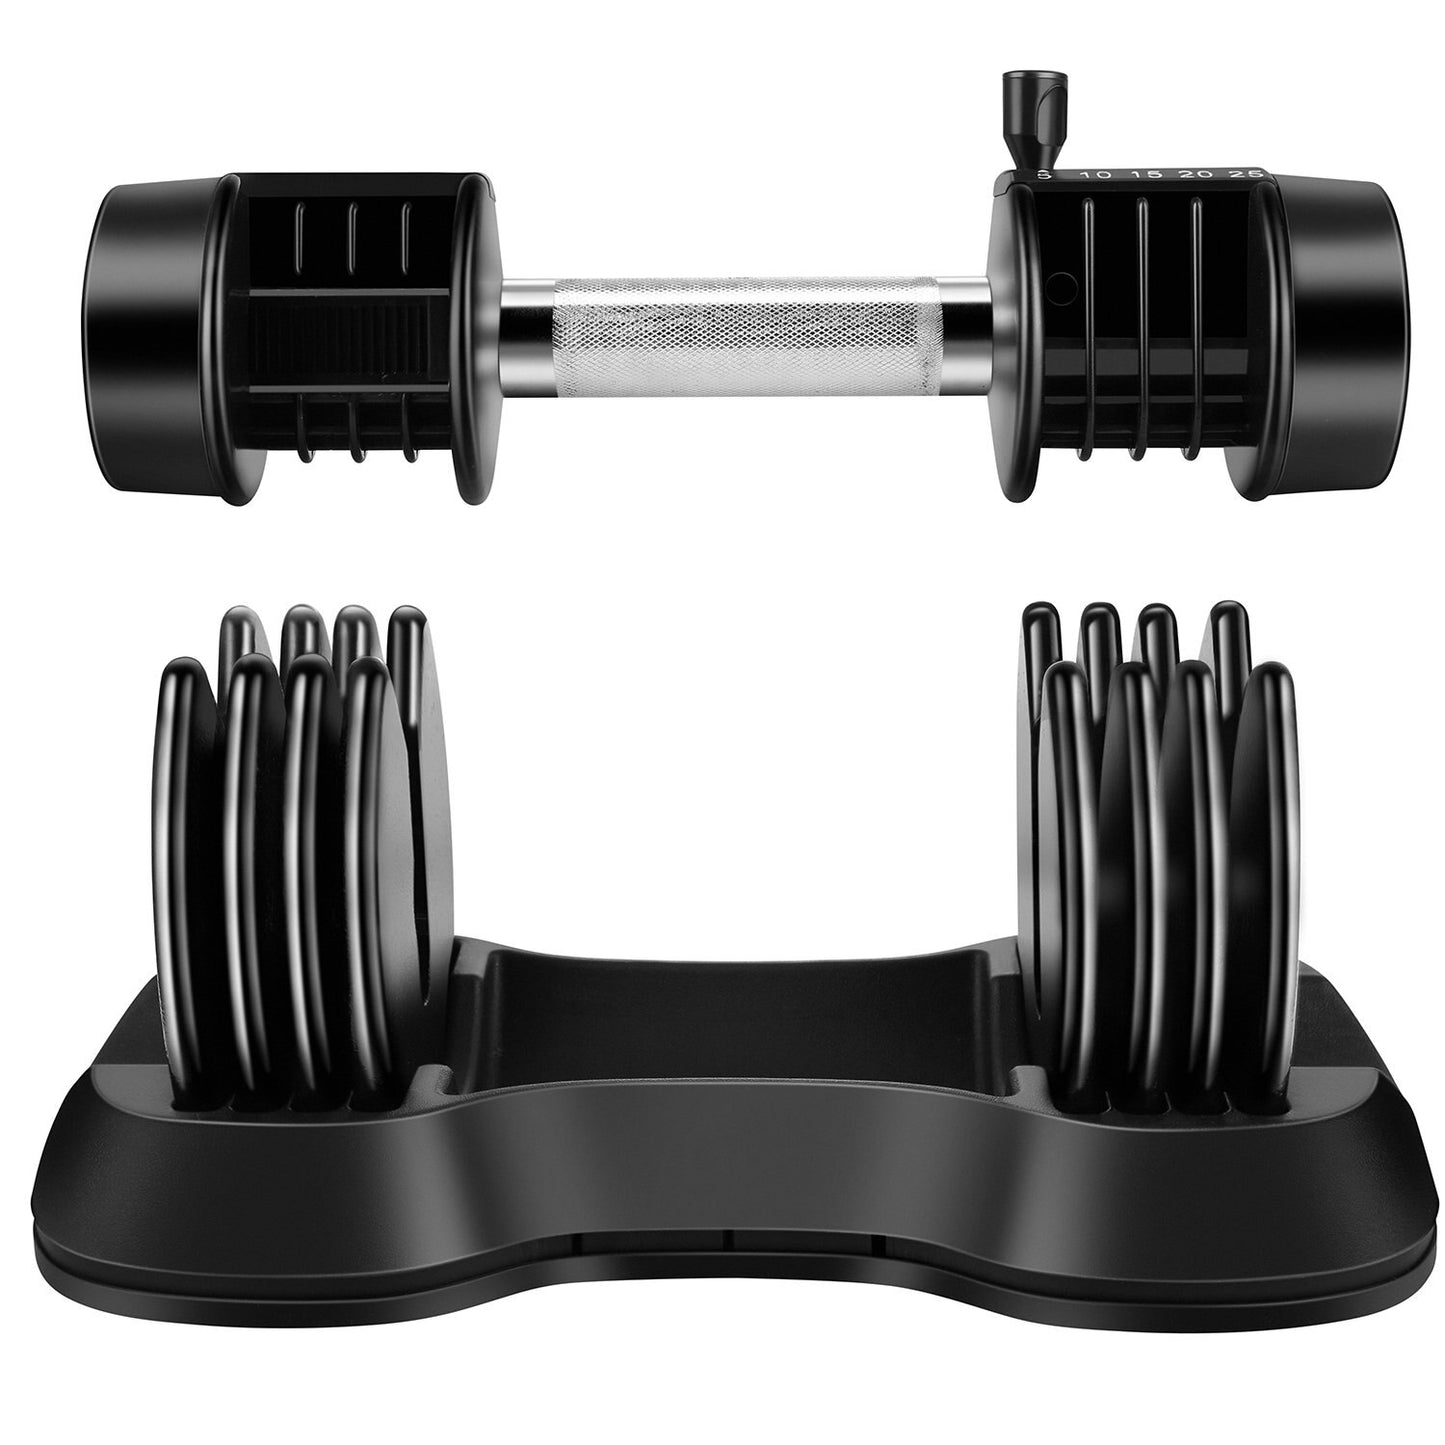 US Stock Adjustable Dumbbell 25 lbs with Fast Automatic Adjustable and Weight Plate for Workout Home Gym